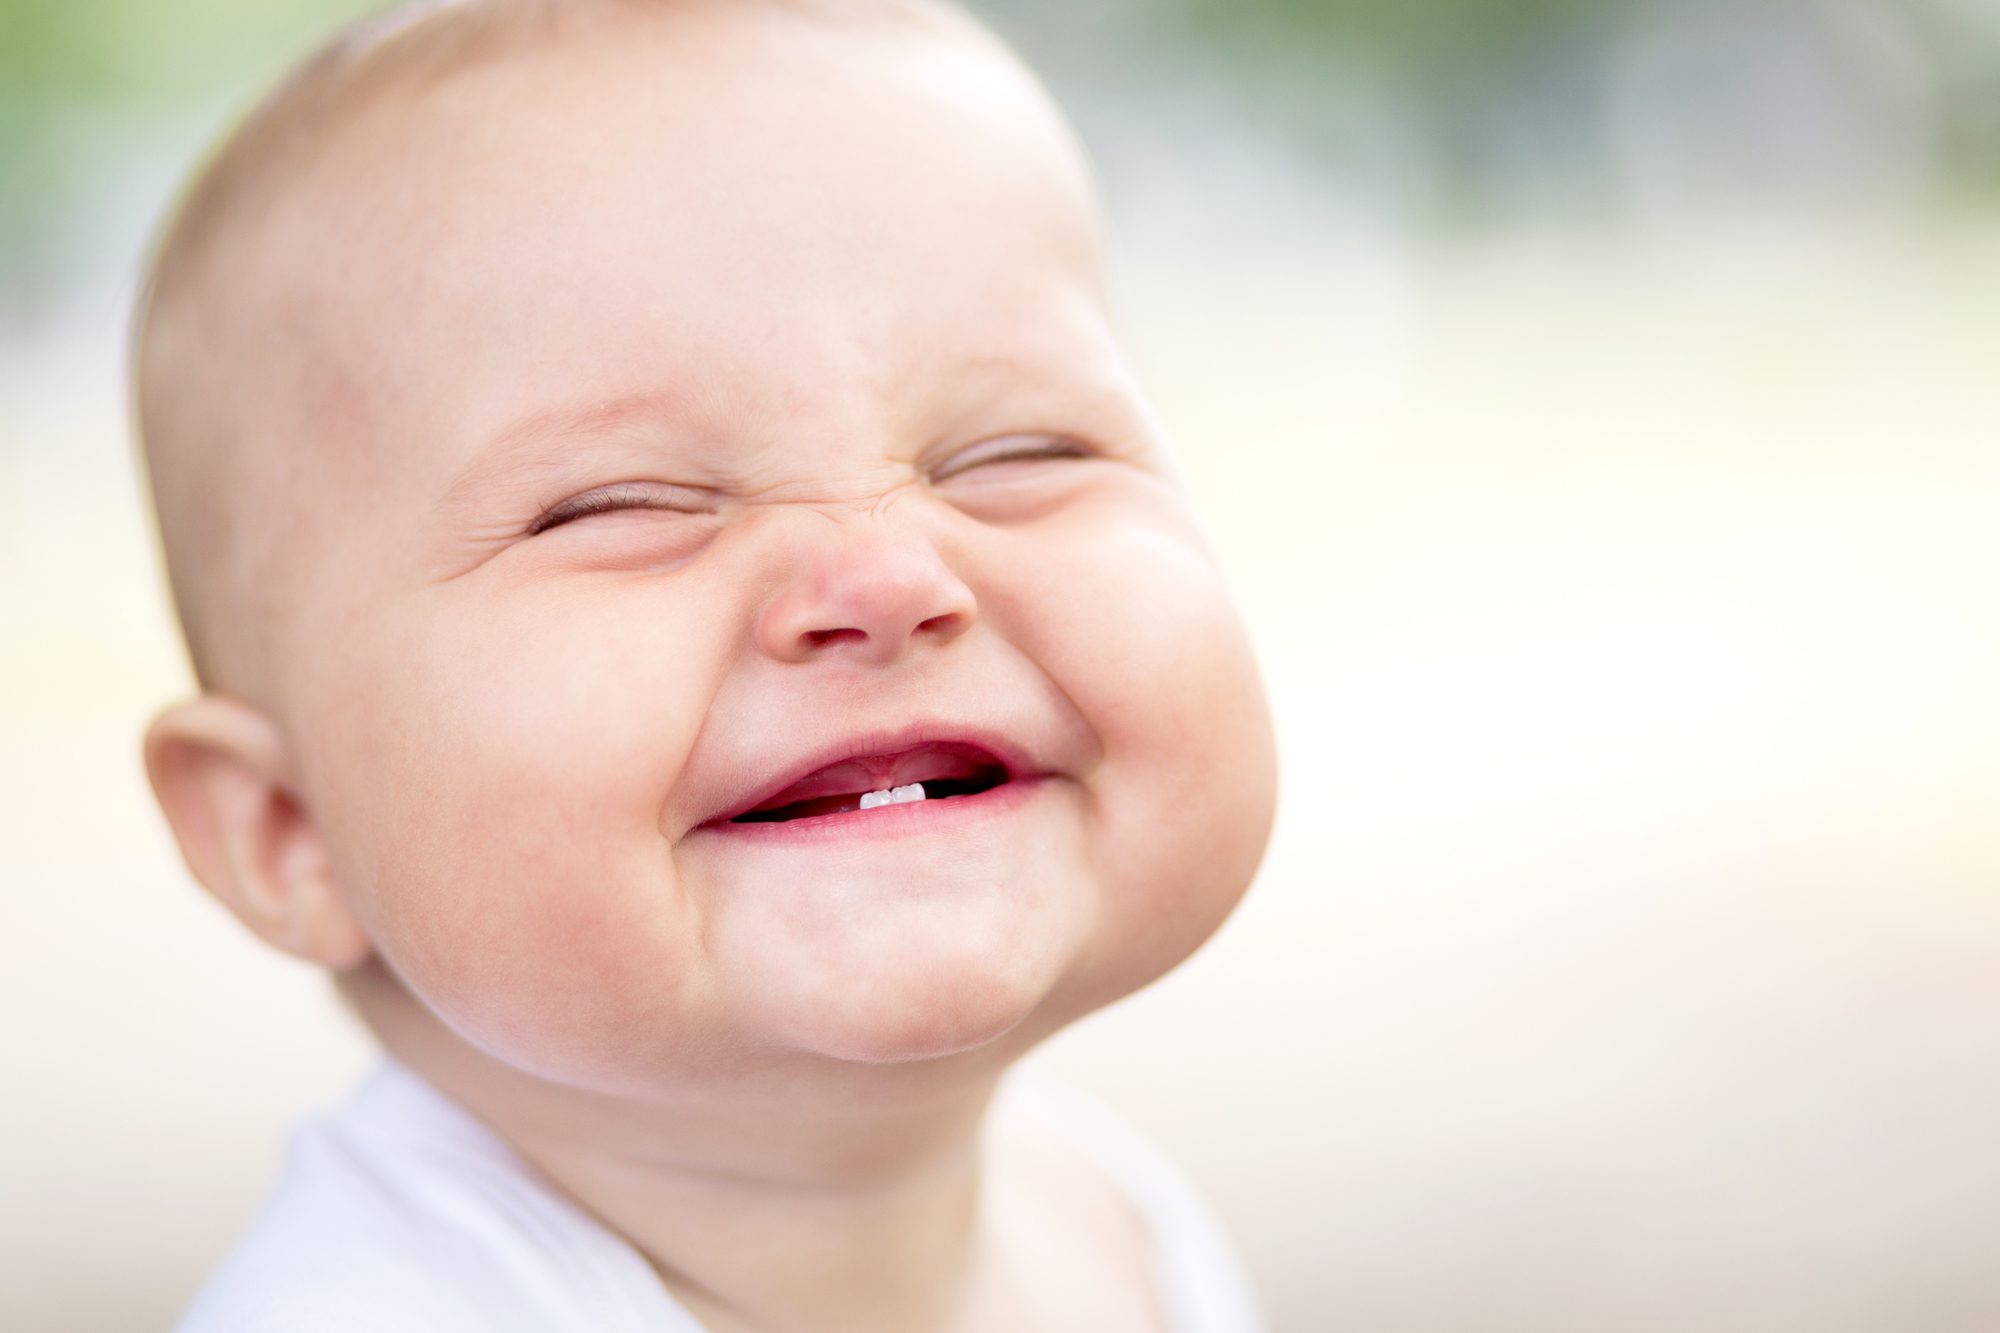 Why are baby teeth important?